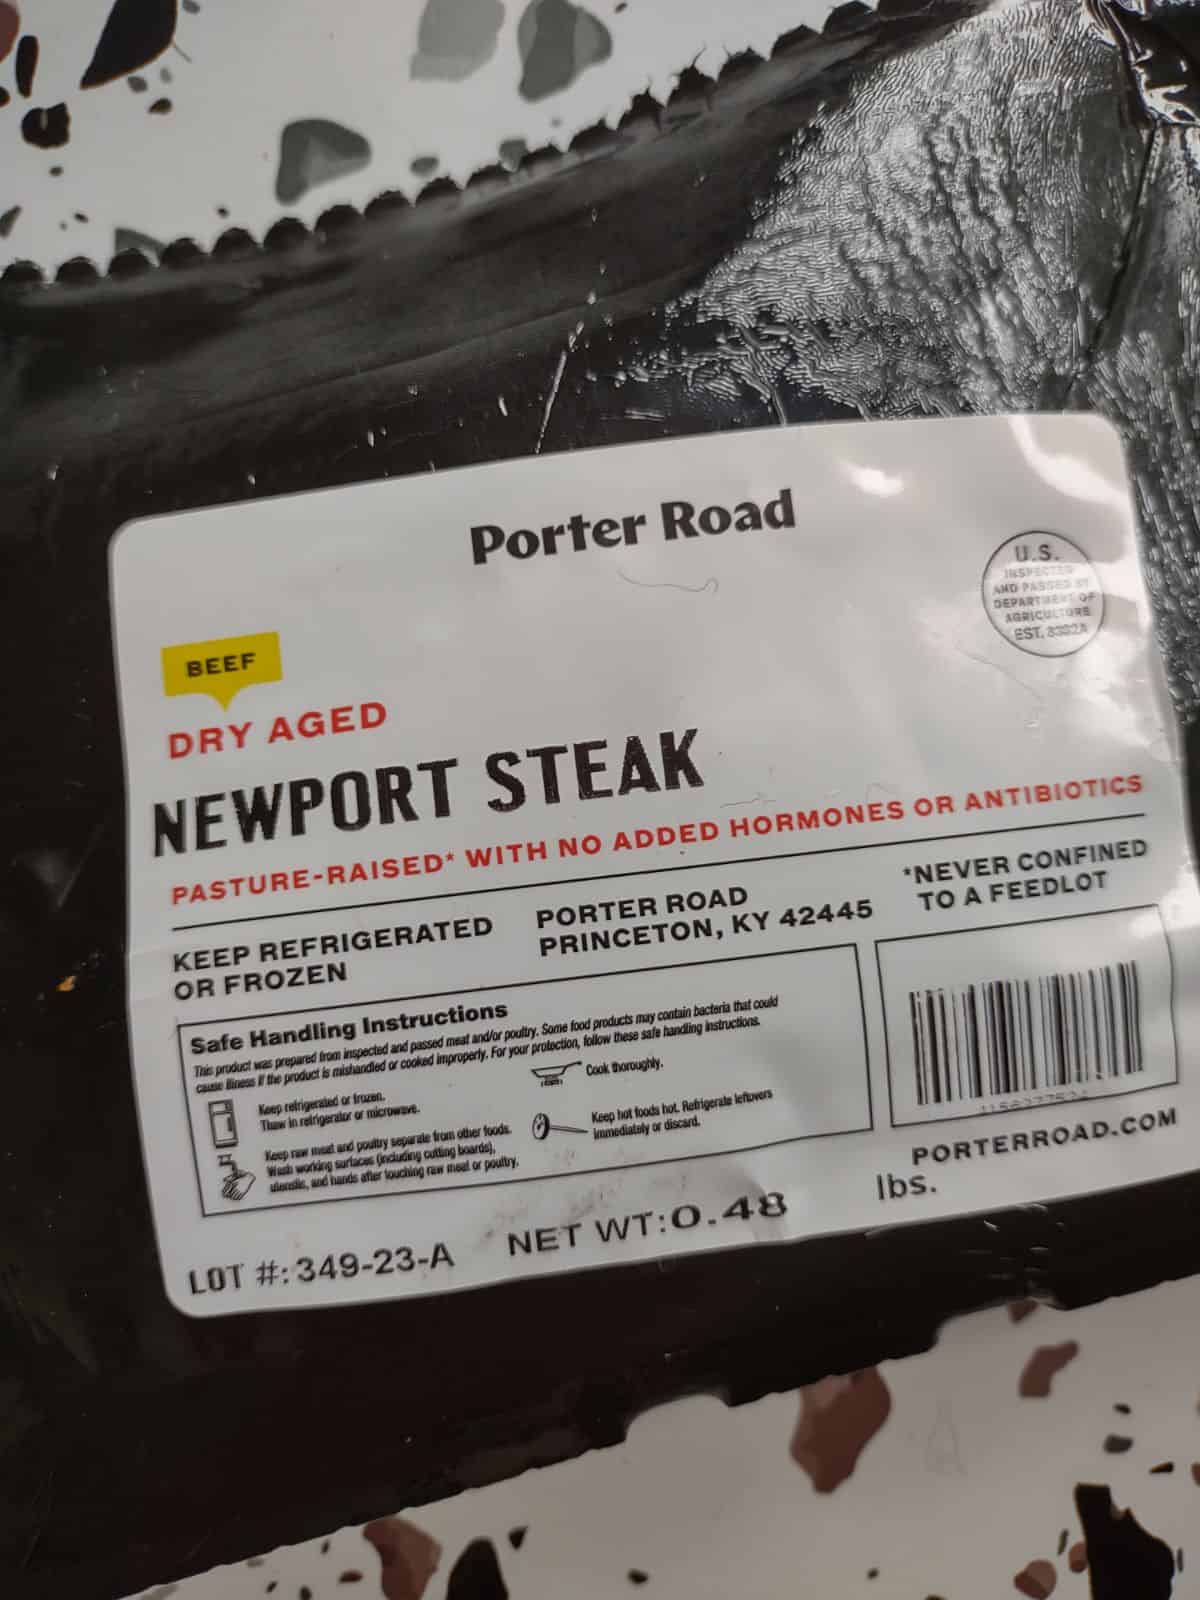 The back of a package of Porter Road Dry Aged Newport Steak. The steak weights 0.48 lbs.